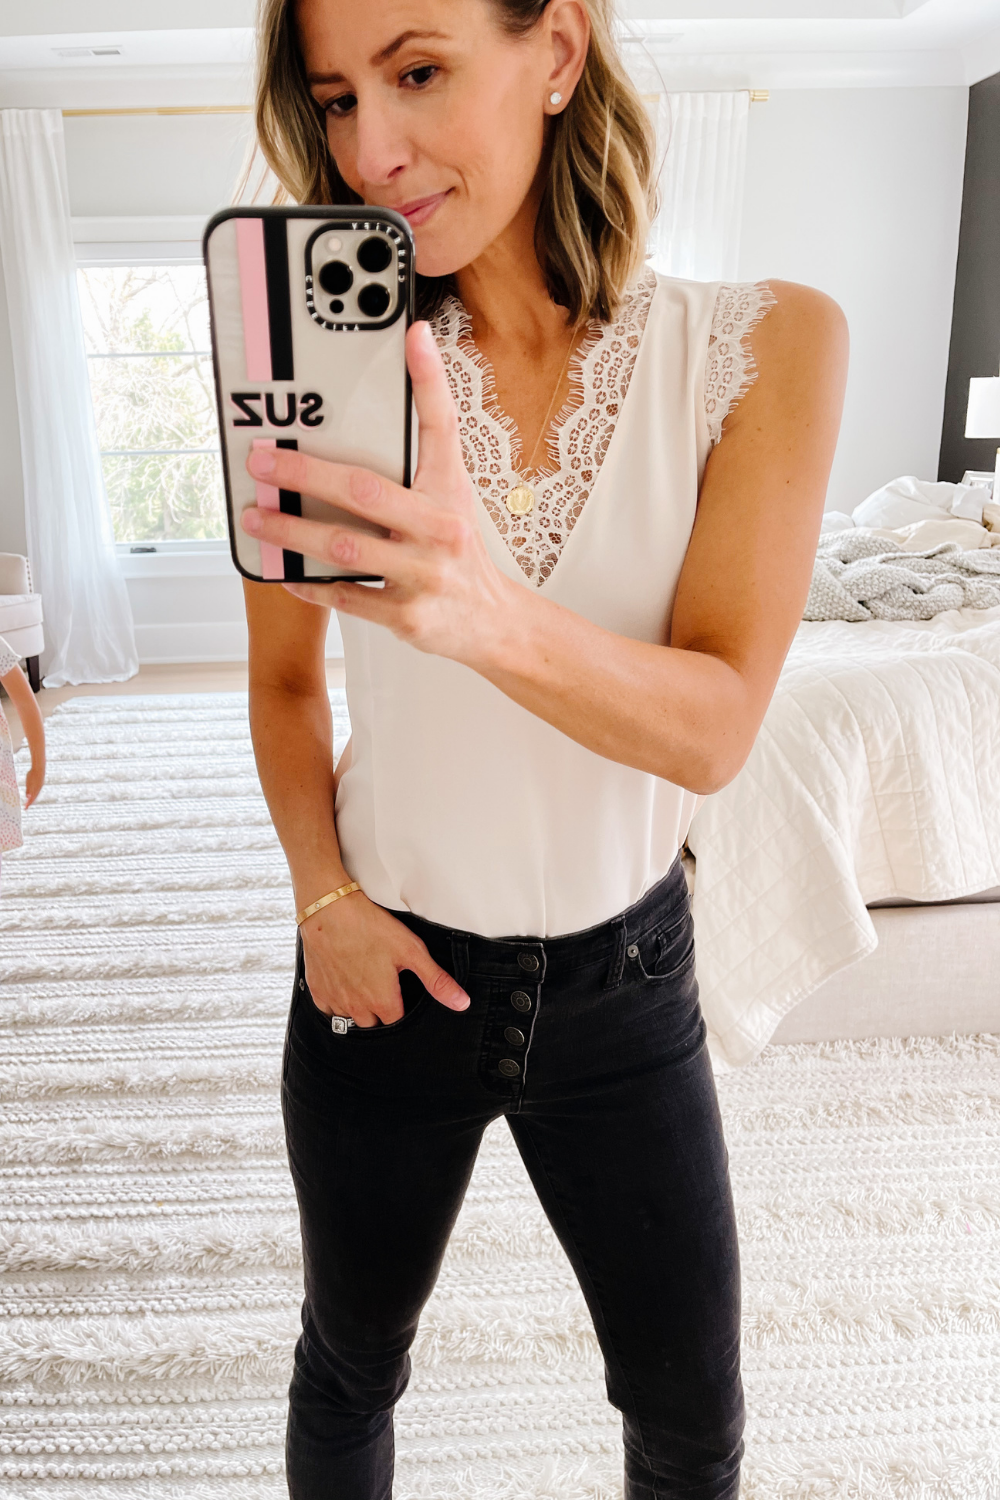 Suzanne wearing a lace trim cami and jeans